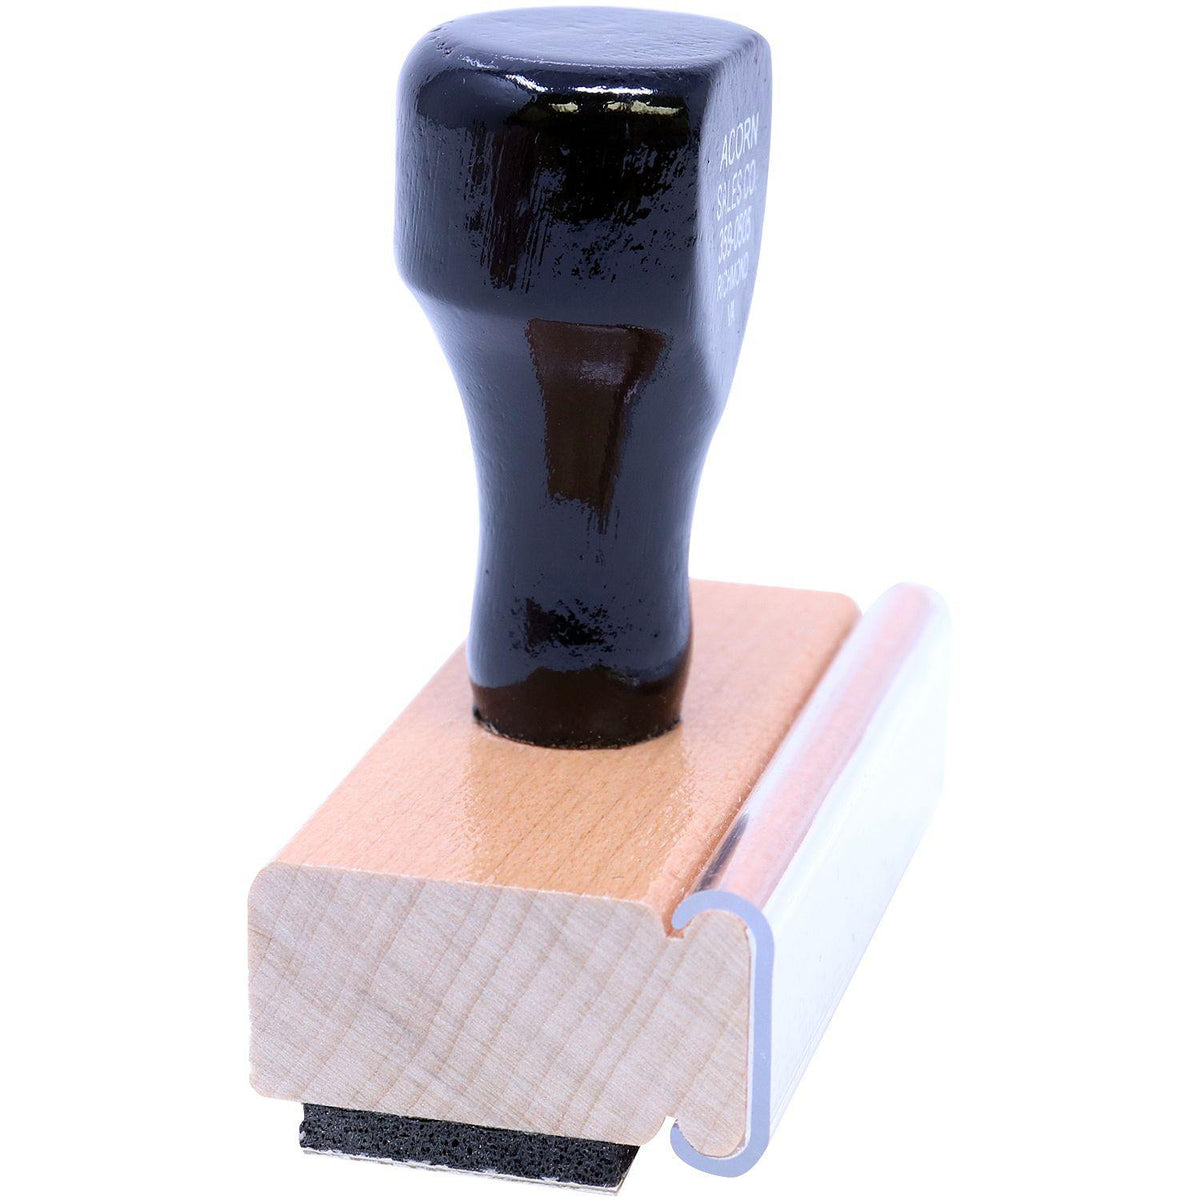 Side View of Large Rewrite In Cursive Rubber Stamp at an Angle